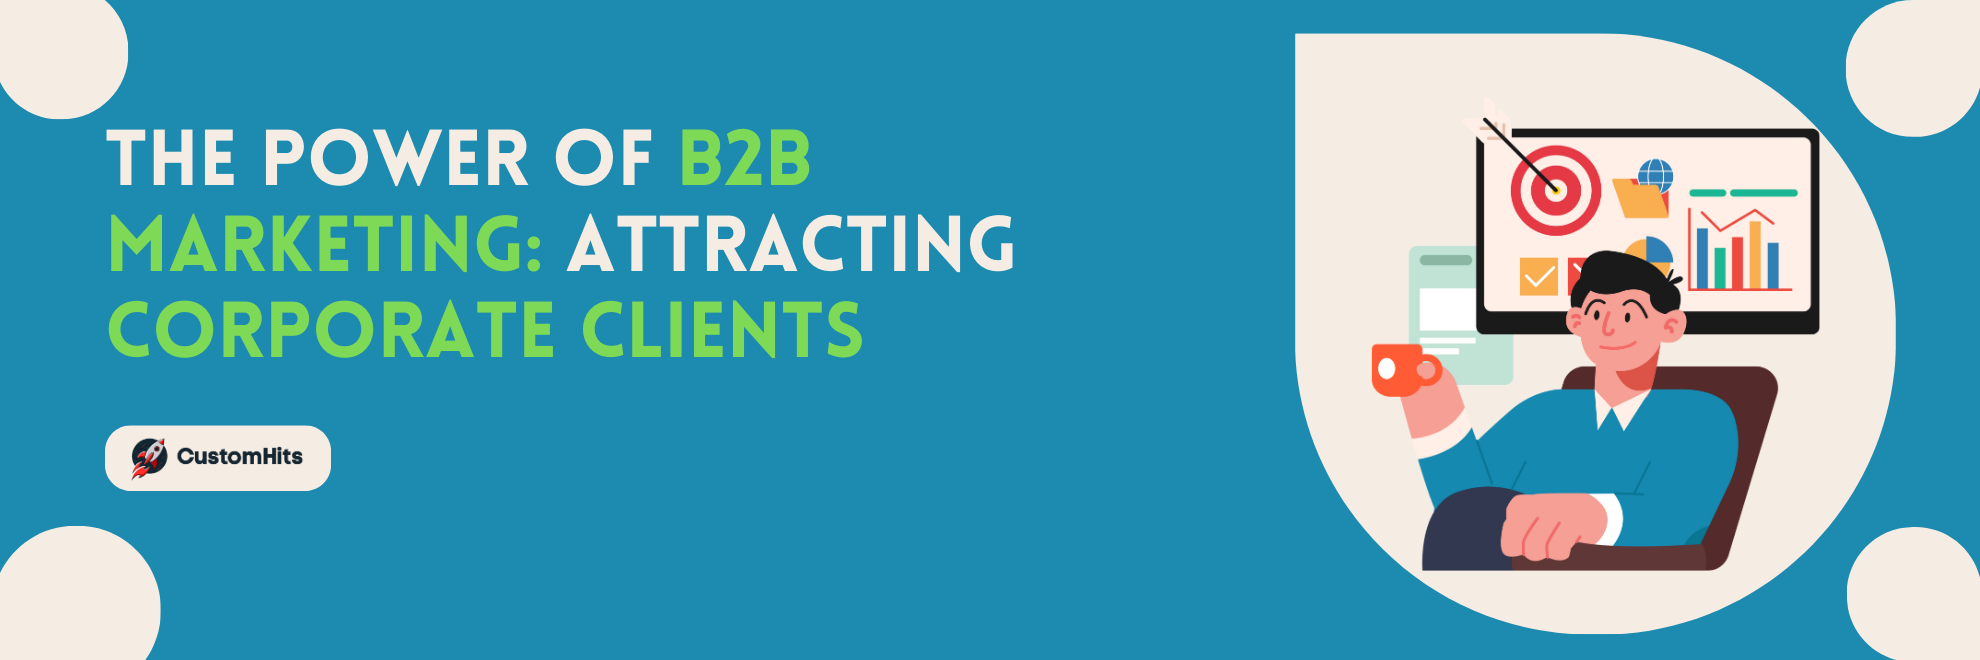 The Power of B2B Marketing: Attracting Corporate Clients